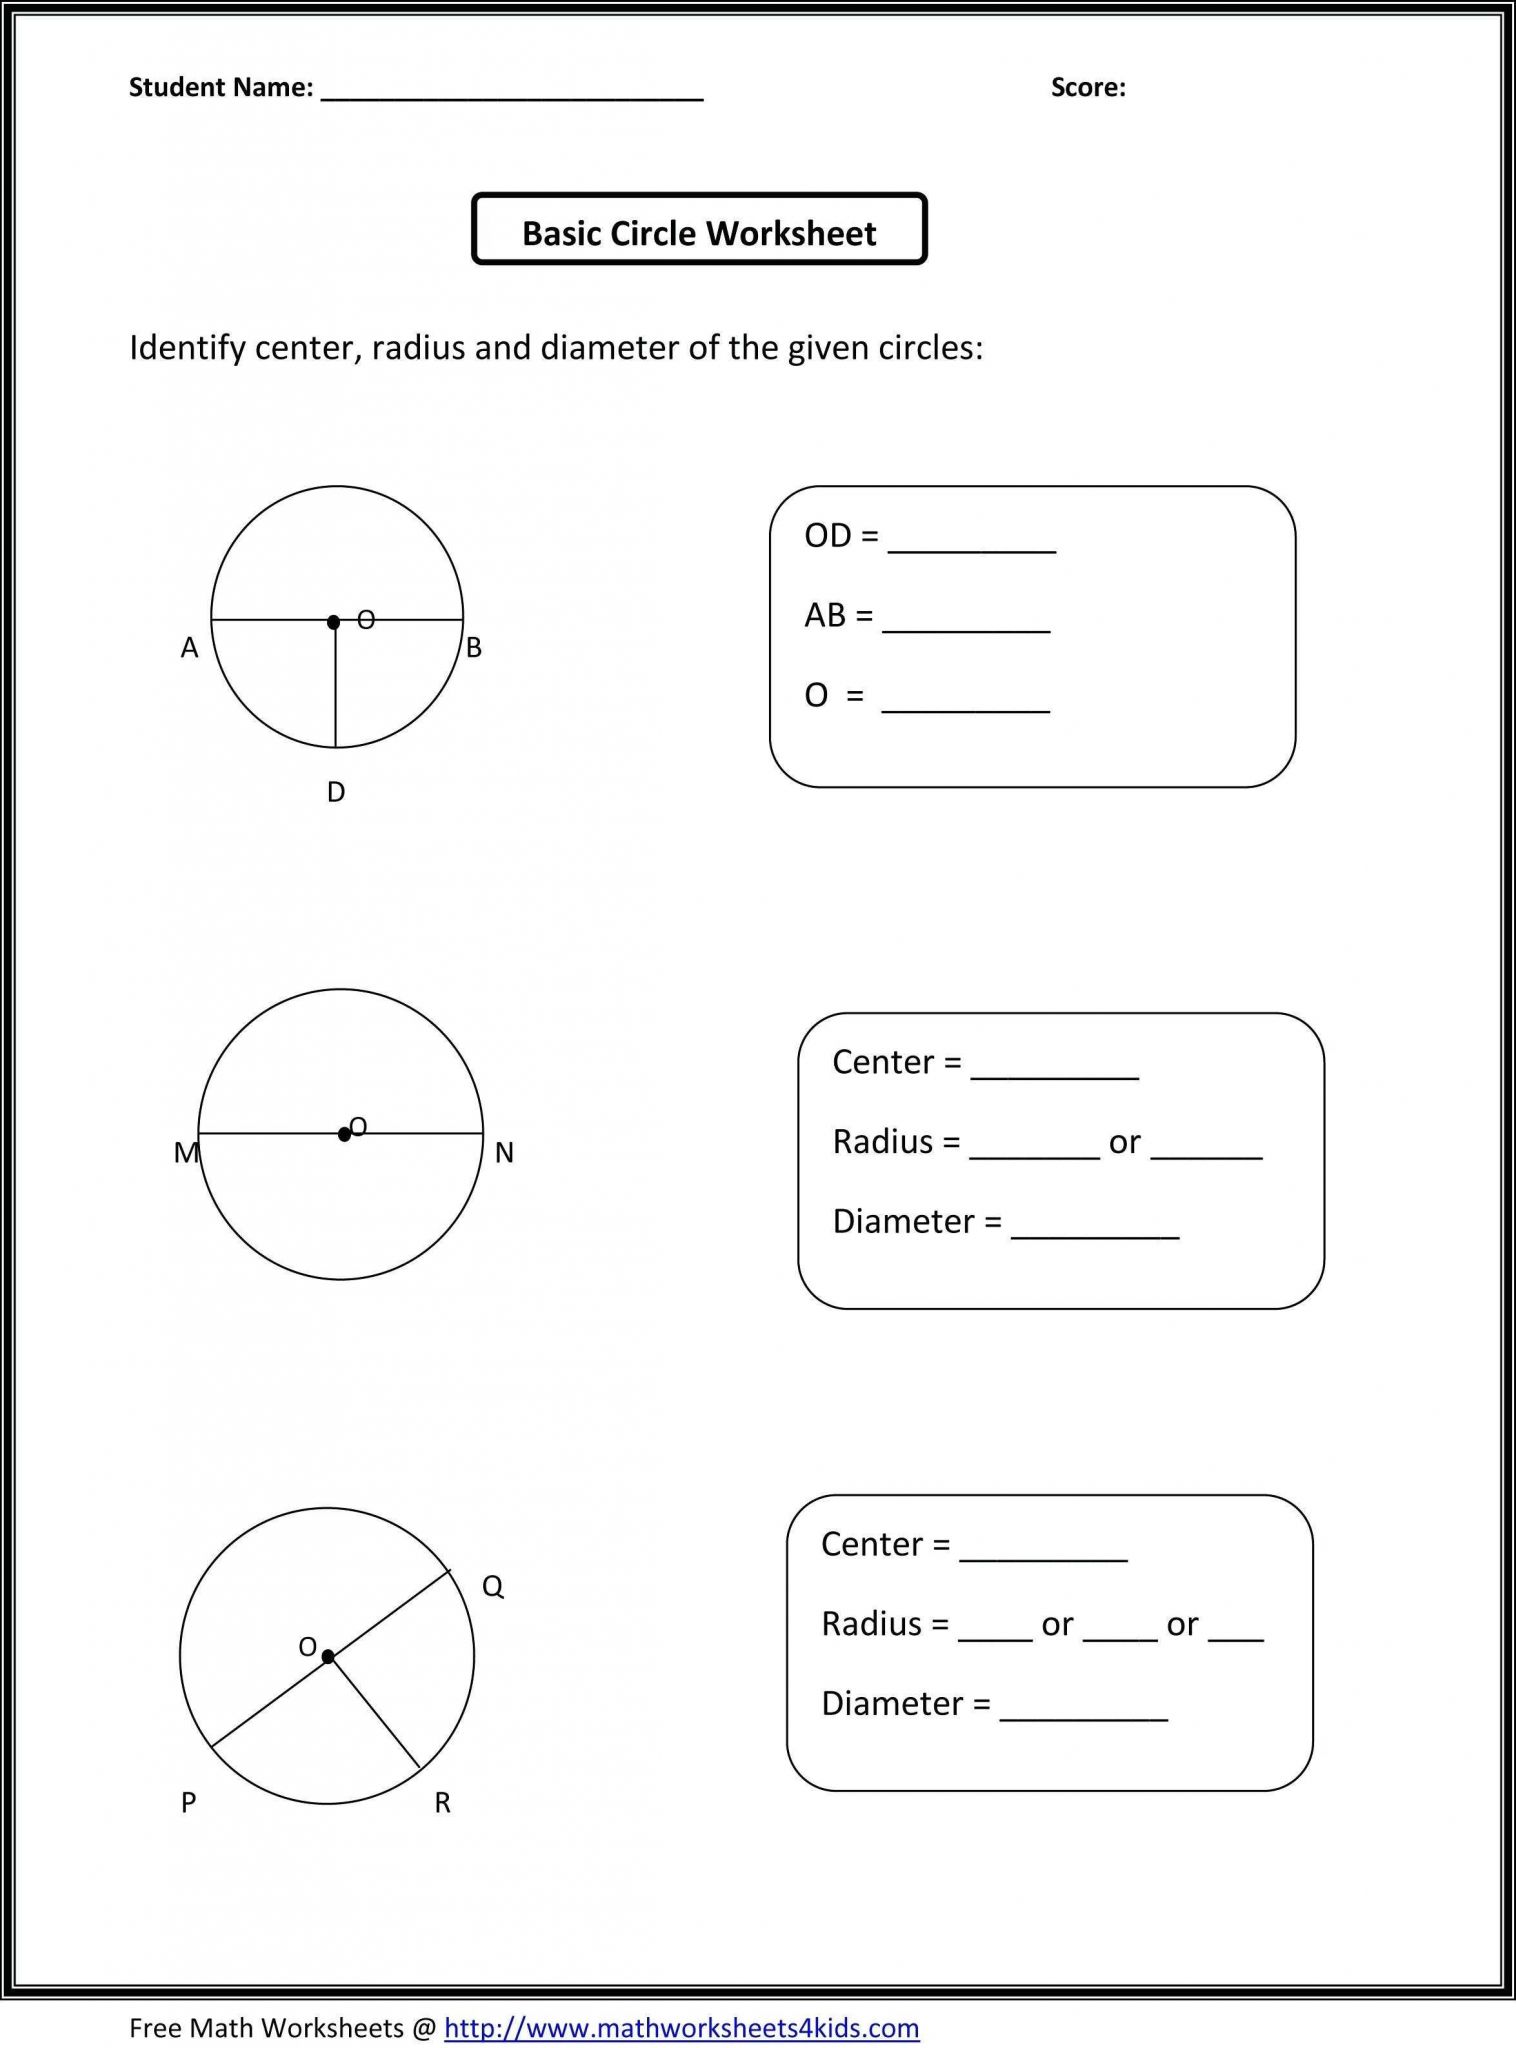 Transport In Cells Worksheet Answers Along with Active Transport Worksheet Answers Awesome 15 Awesome Graph Cell